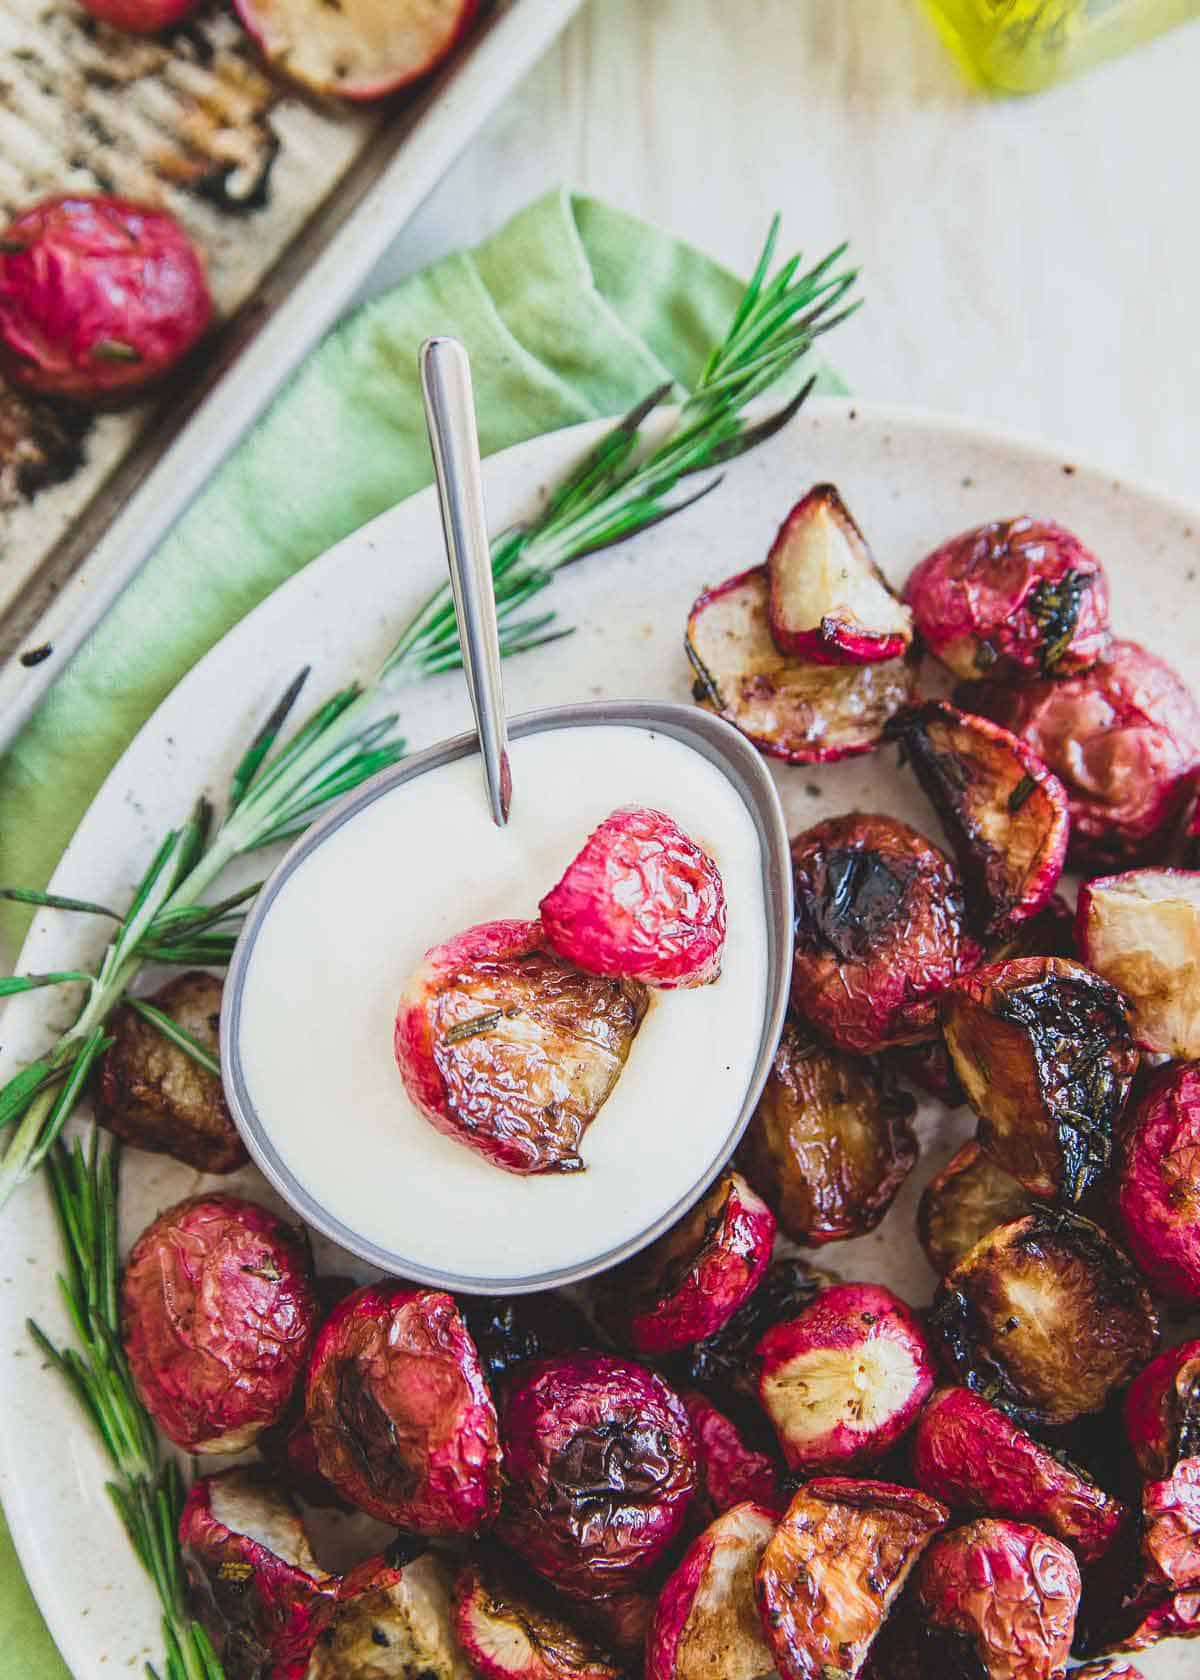 A simple Greek yogurt dipping sauce is the perfect pairing to these crispy rosemary oven roasted radishes.